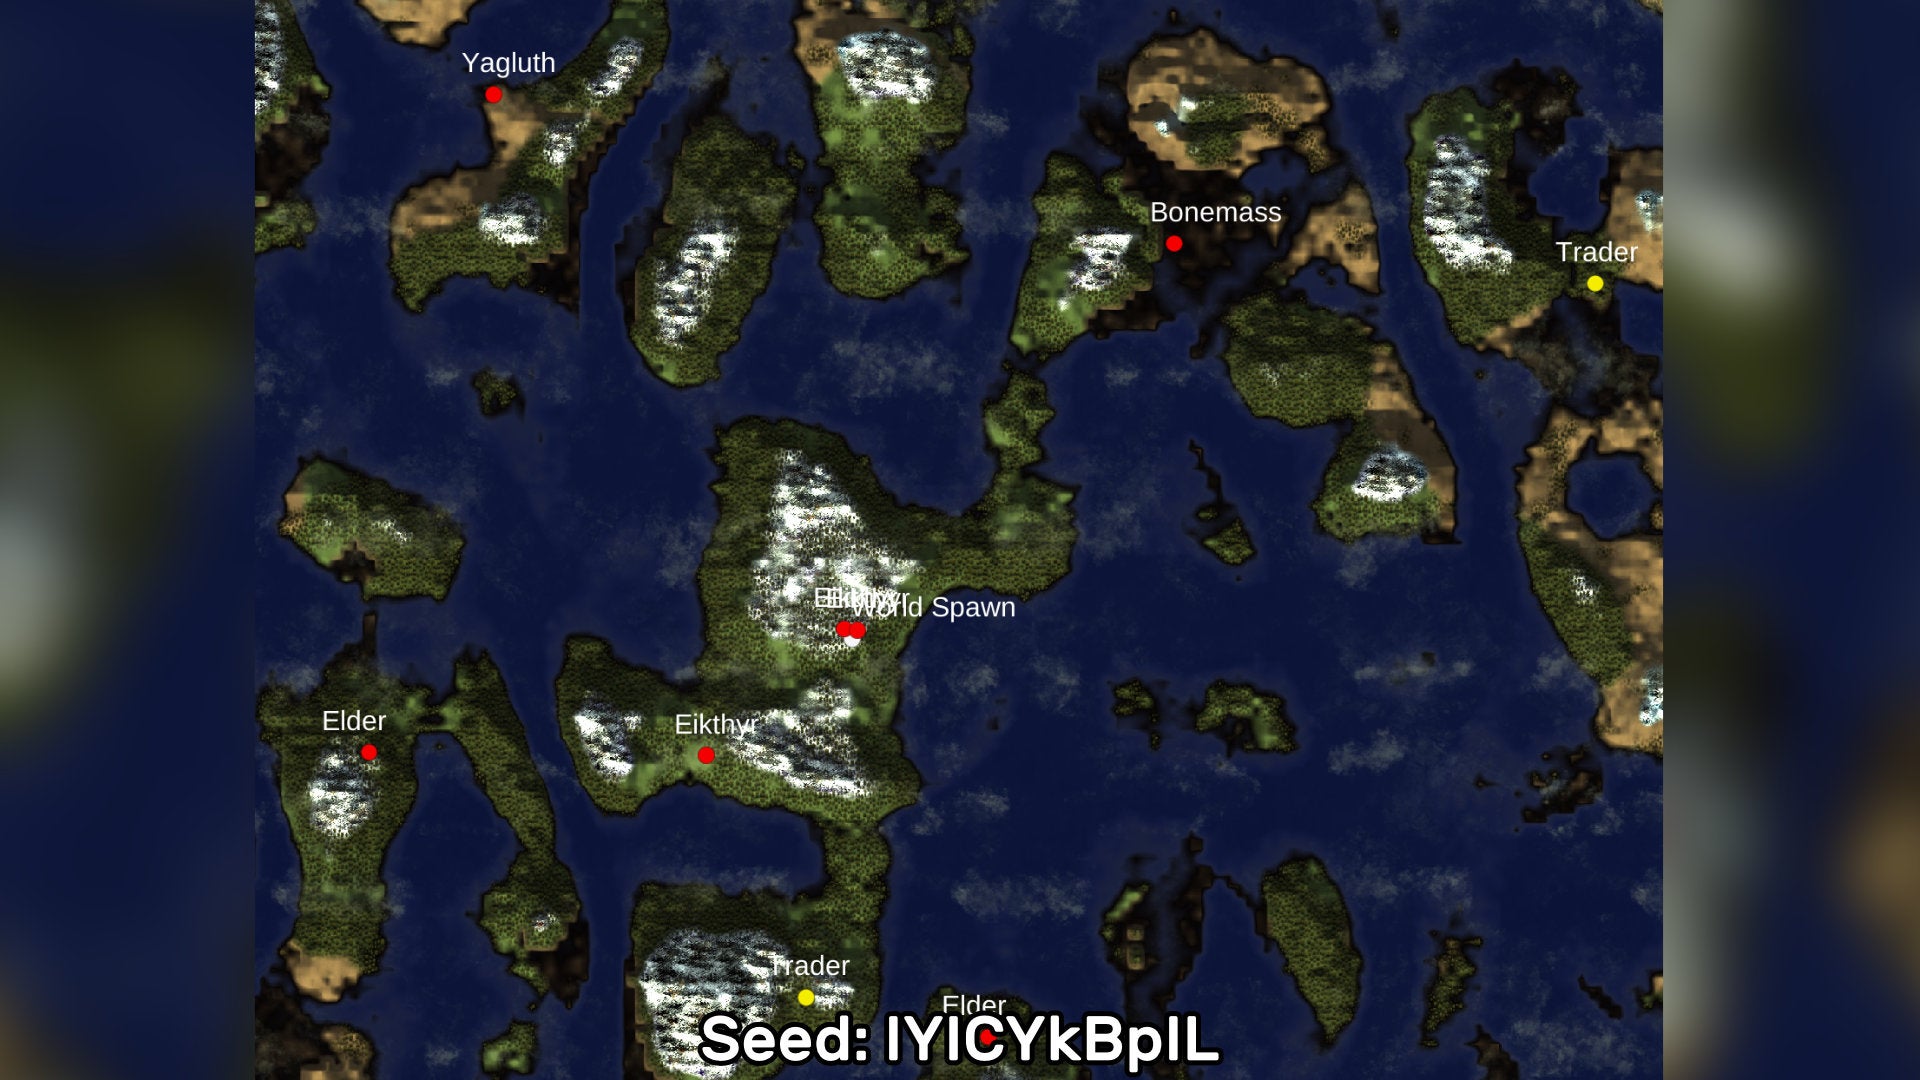 A screenshot of one of the best Valheim seeds we've found, using the Valheim World Generator tool. Seed: IYICYkBpIL